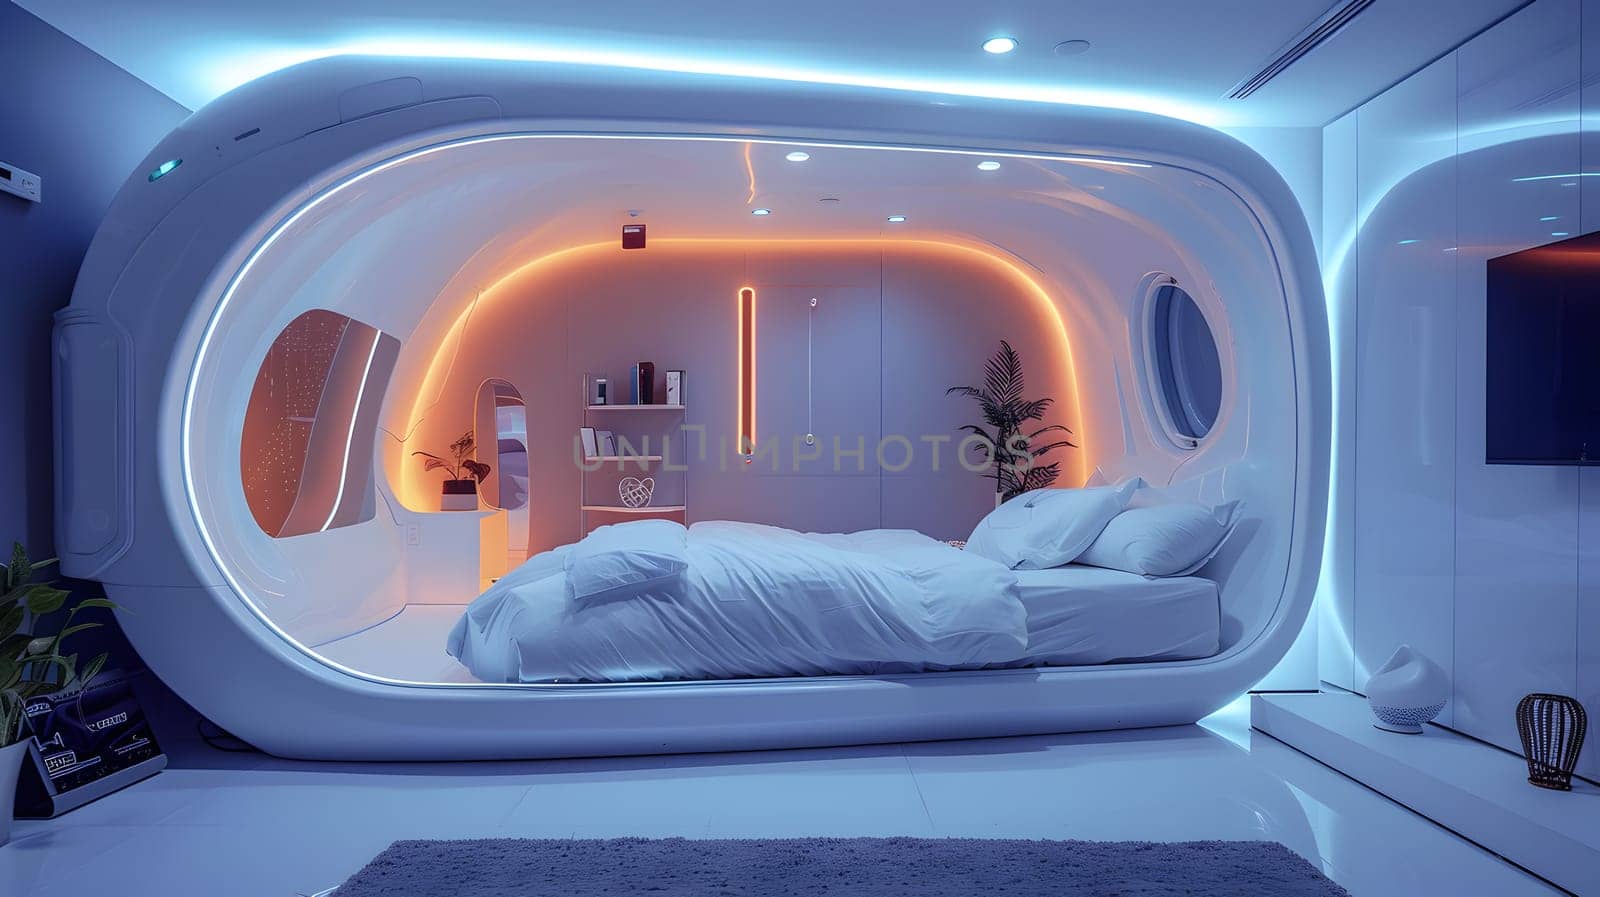 A futuristic bedroom with an electric blue bed in the middle, inspired by automotive design. Automotive lighting serves as the main source of light, resembling vehicle tail brake lights